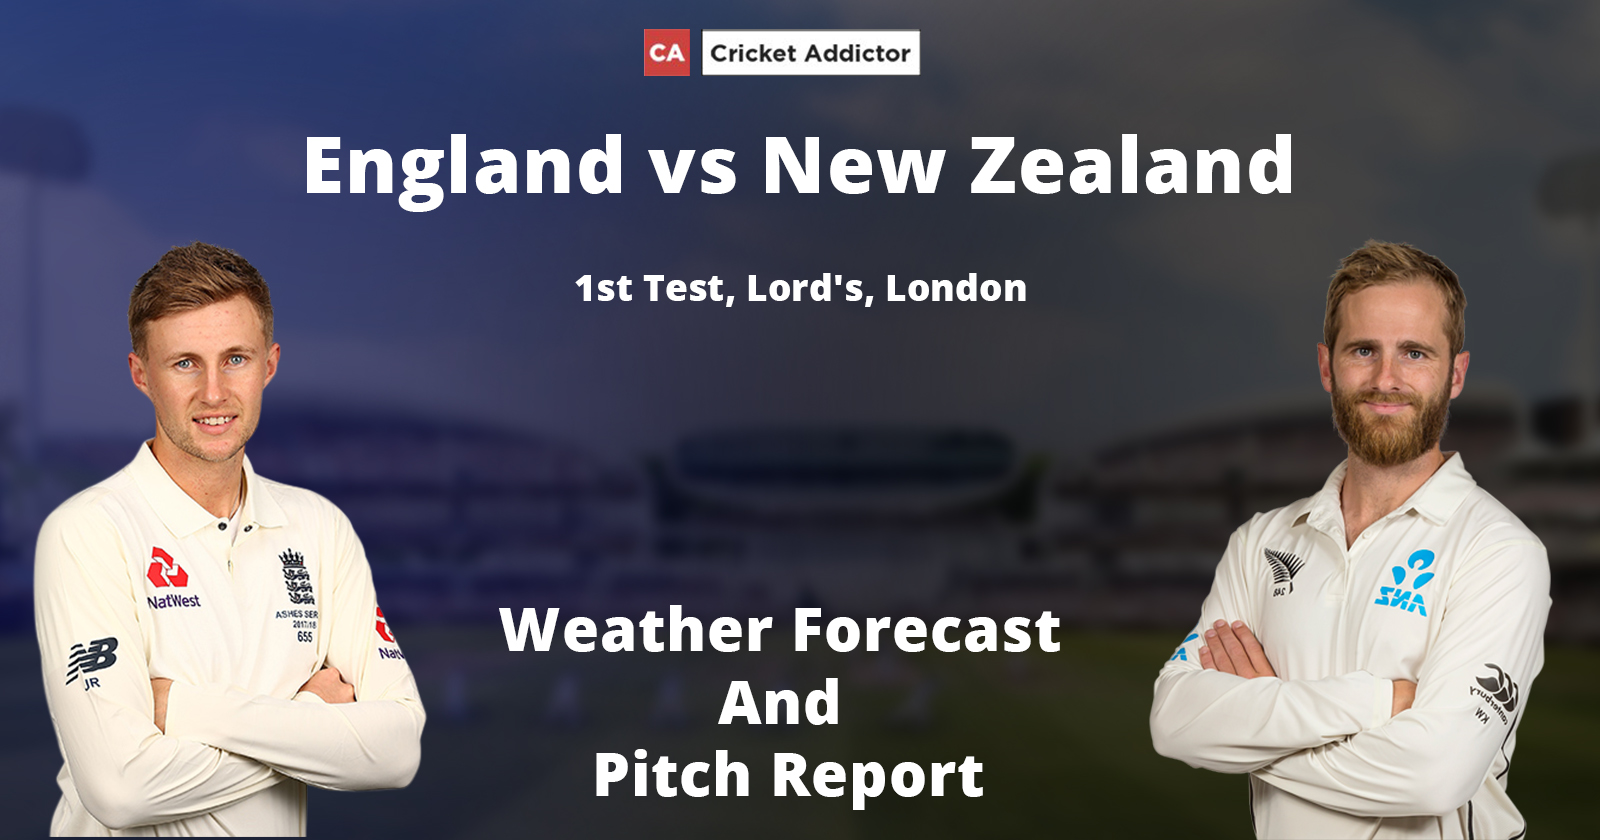 England vs New Zealand 2021, 1st Test- Weather Forecast And Pitch Report